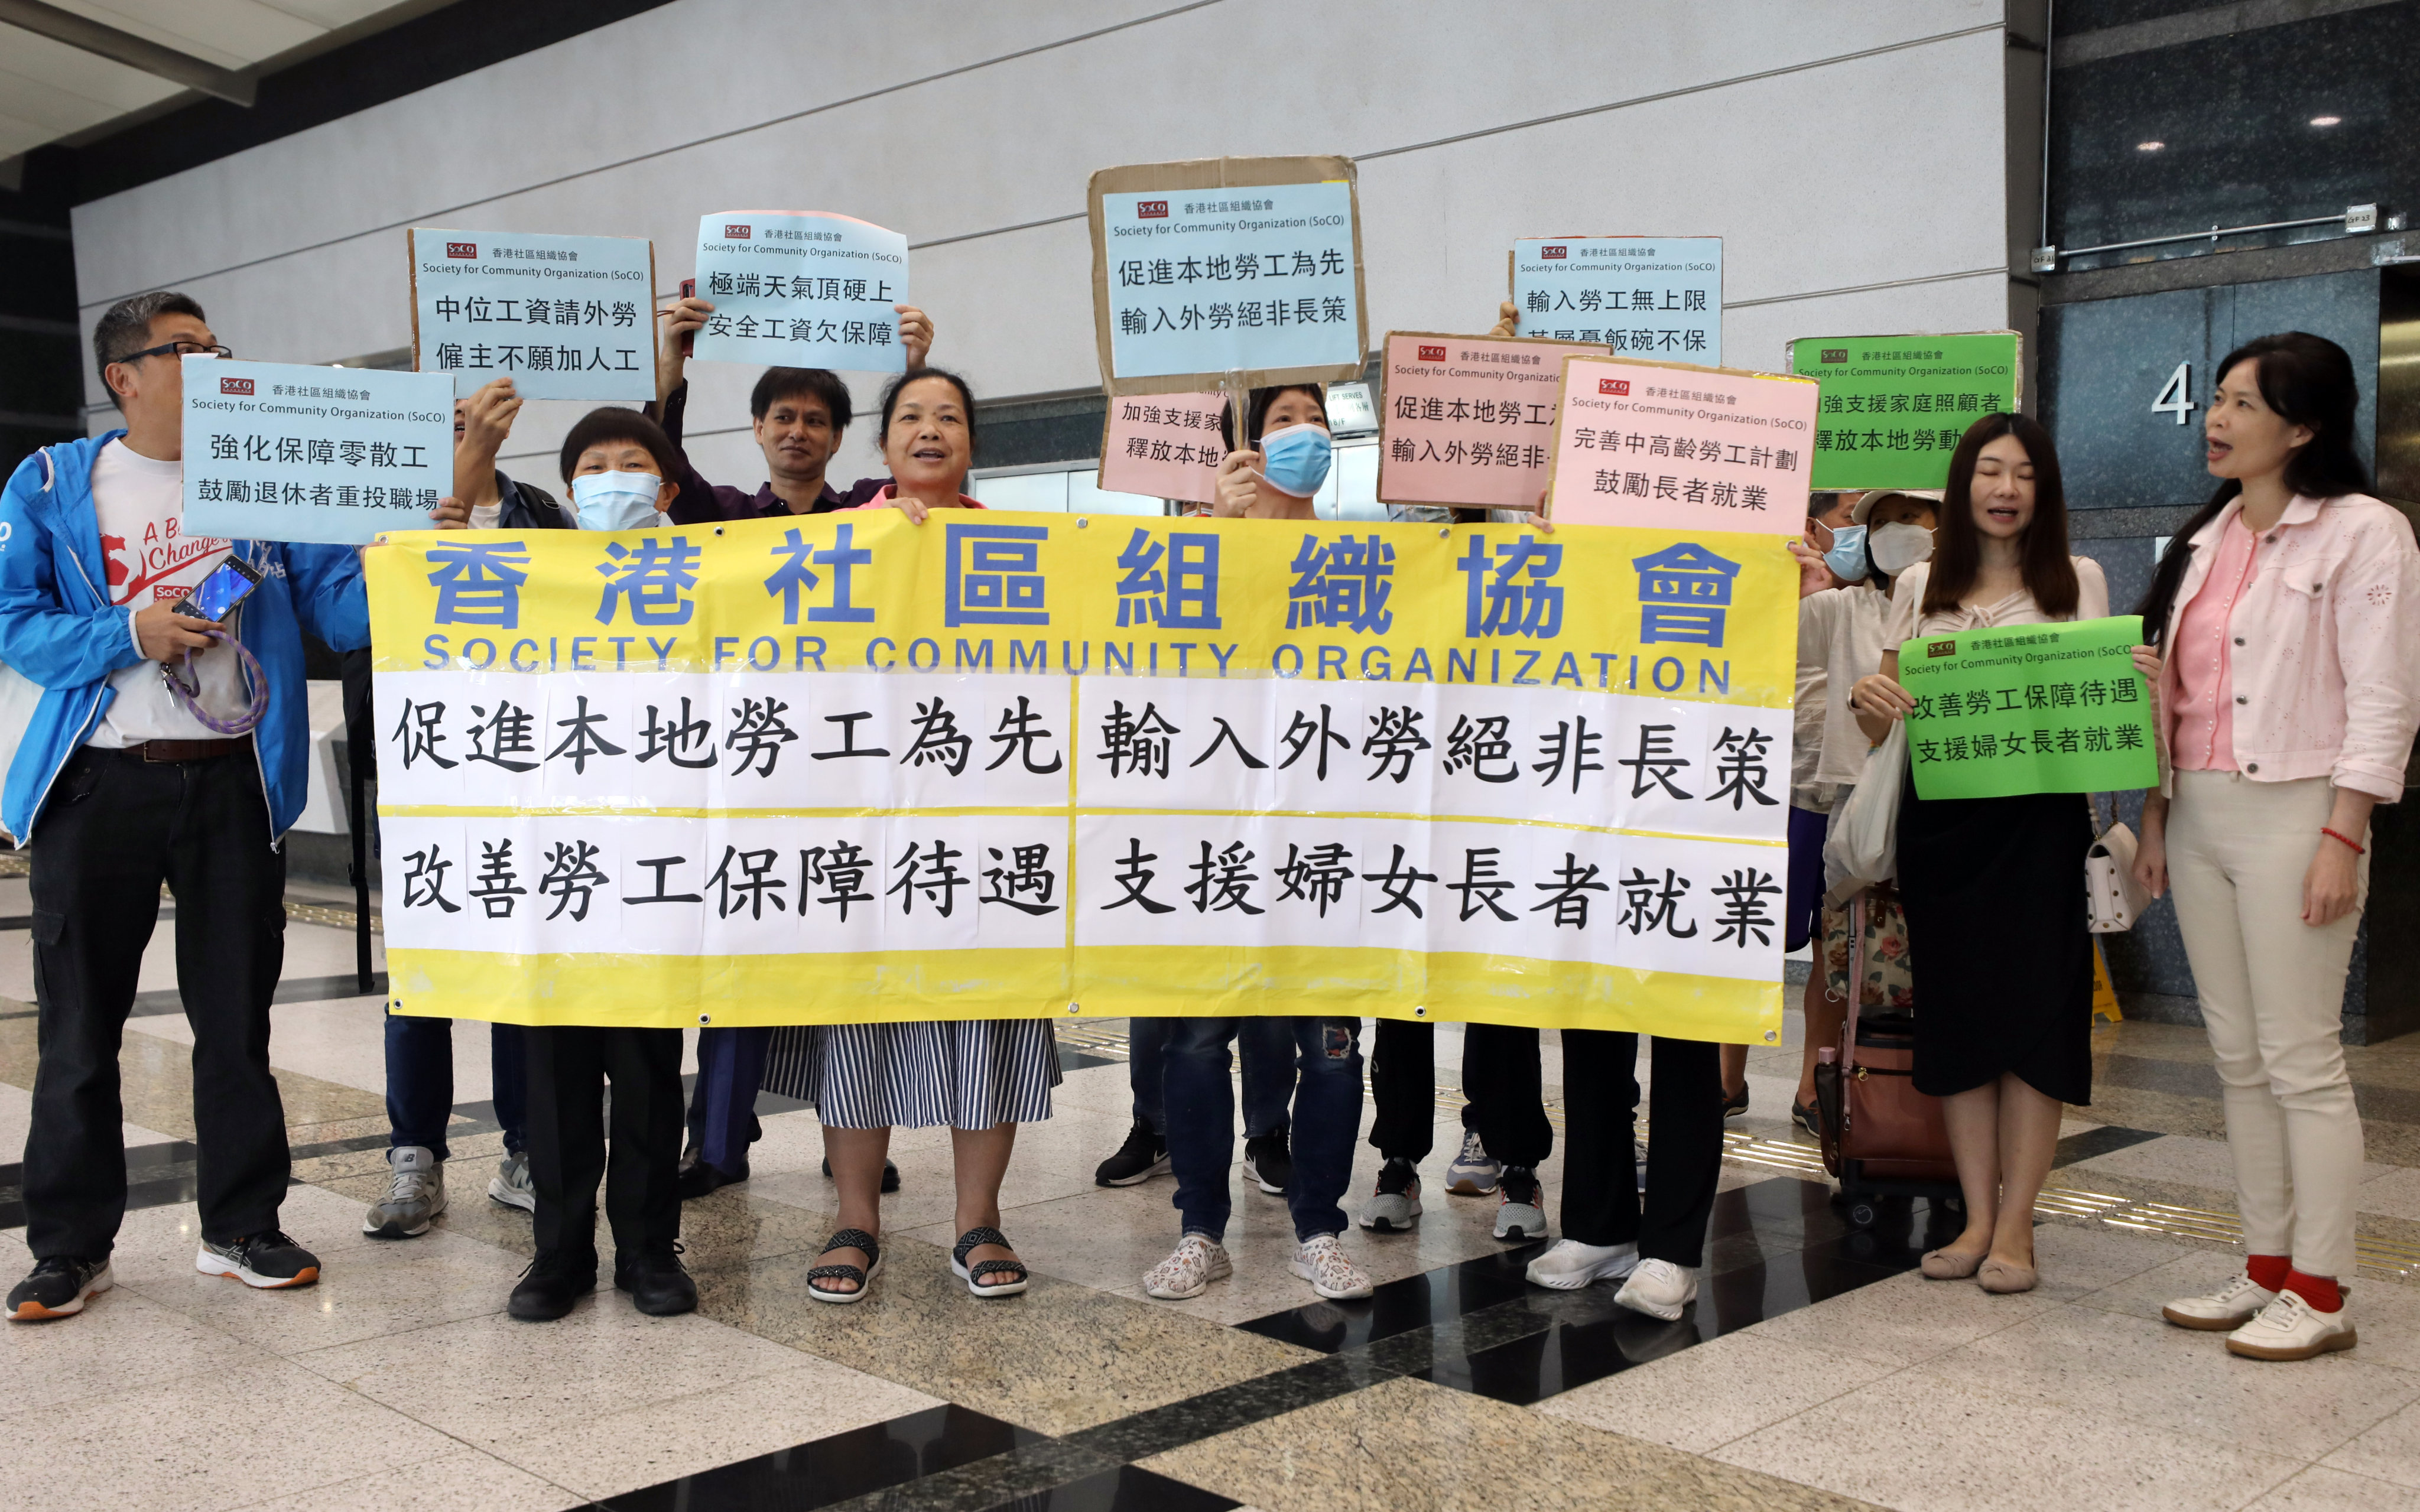 Local workers raise concerns over a new labour import scheme. Photo: Xiaomei Chen